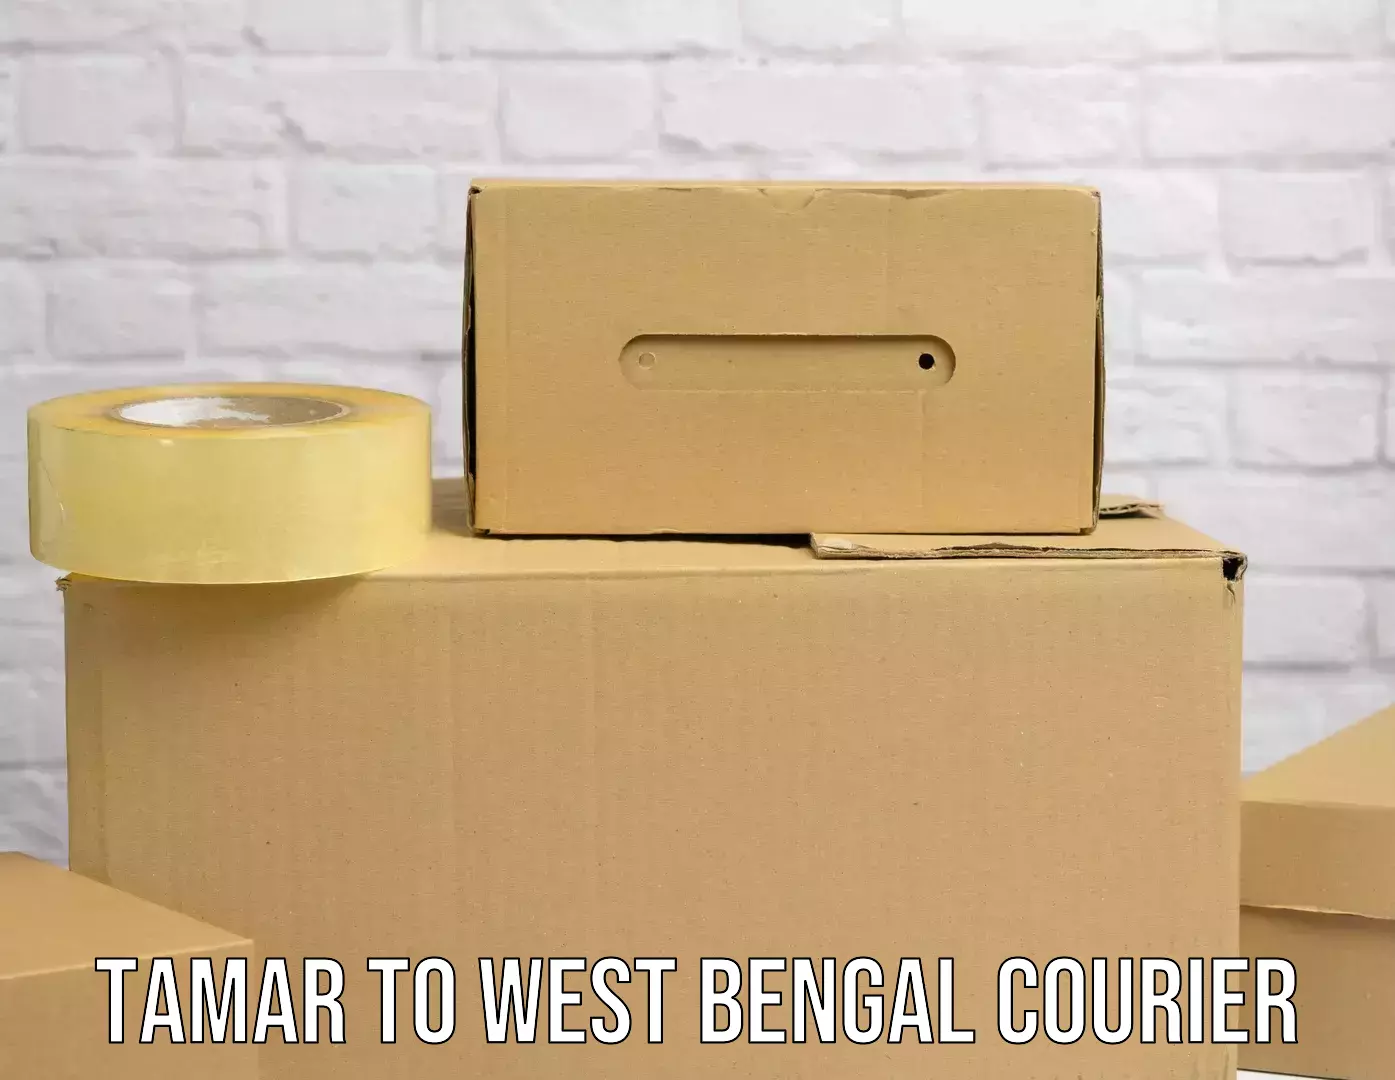 Digital shipping tools in Tamar to West Bengal